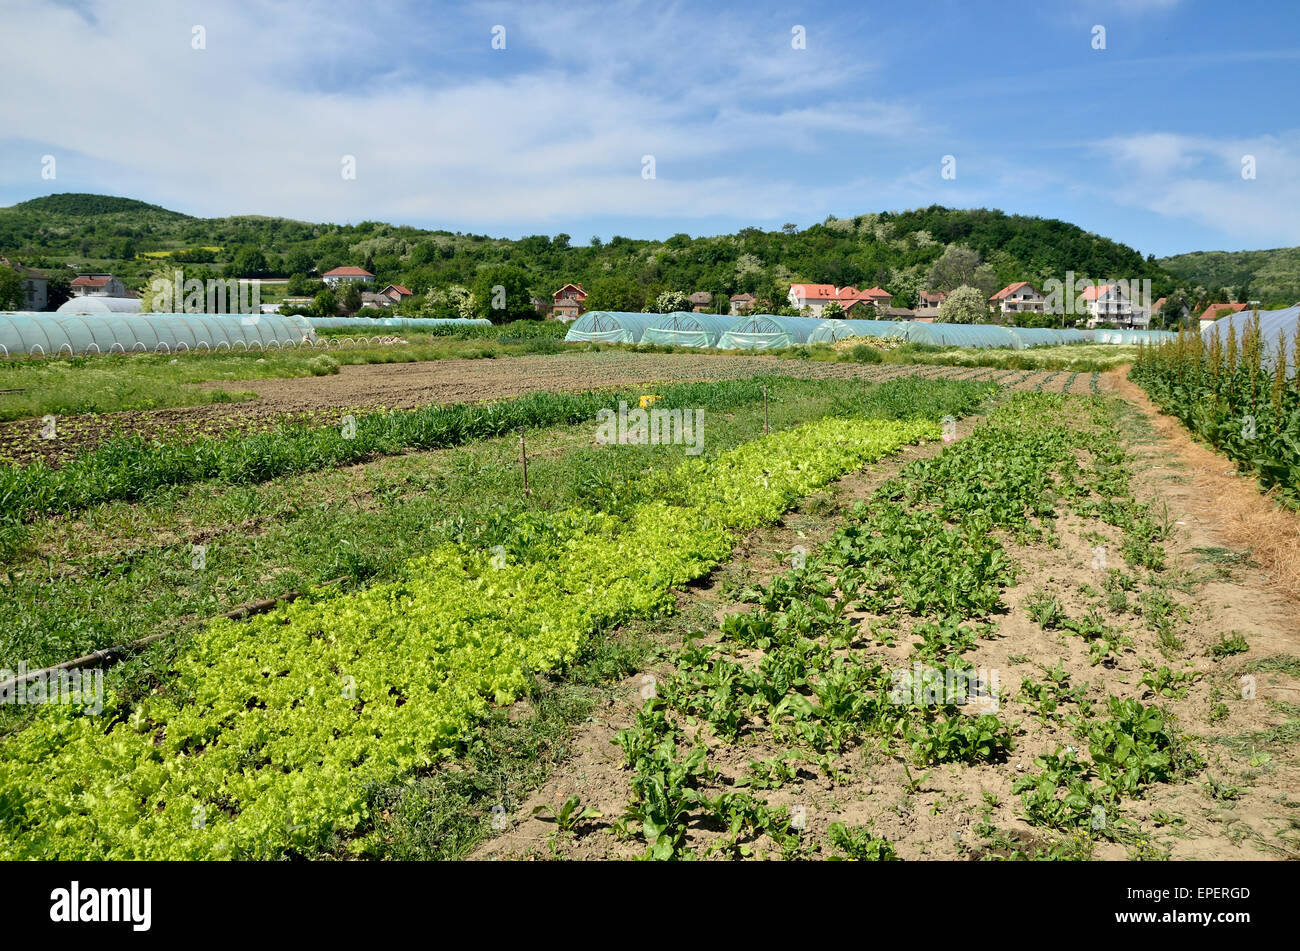 Spinach and lettuce fields with greenhouses in background Stock Photo